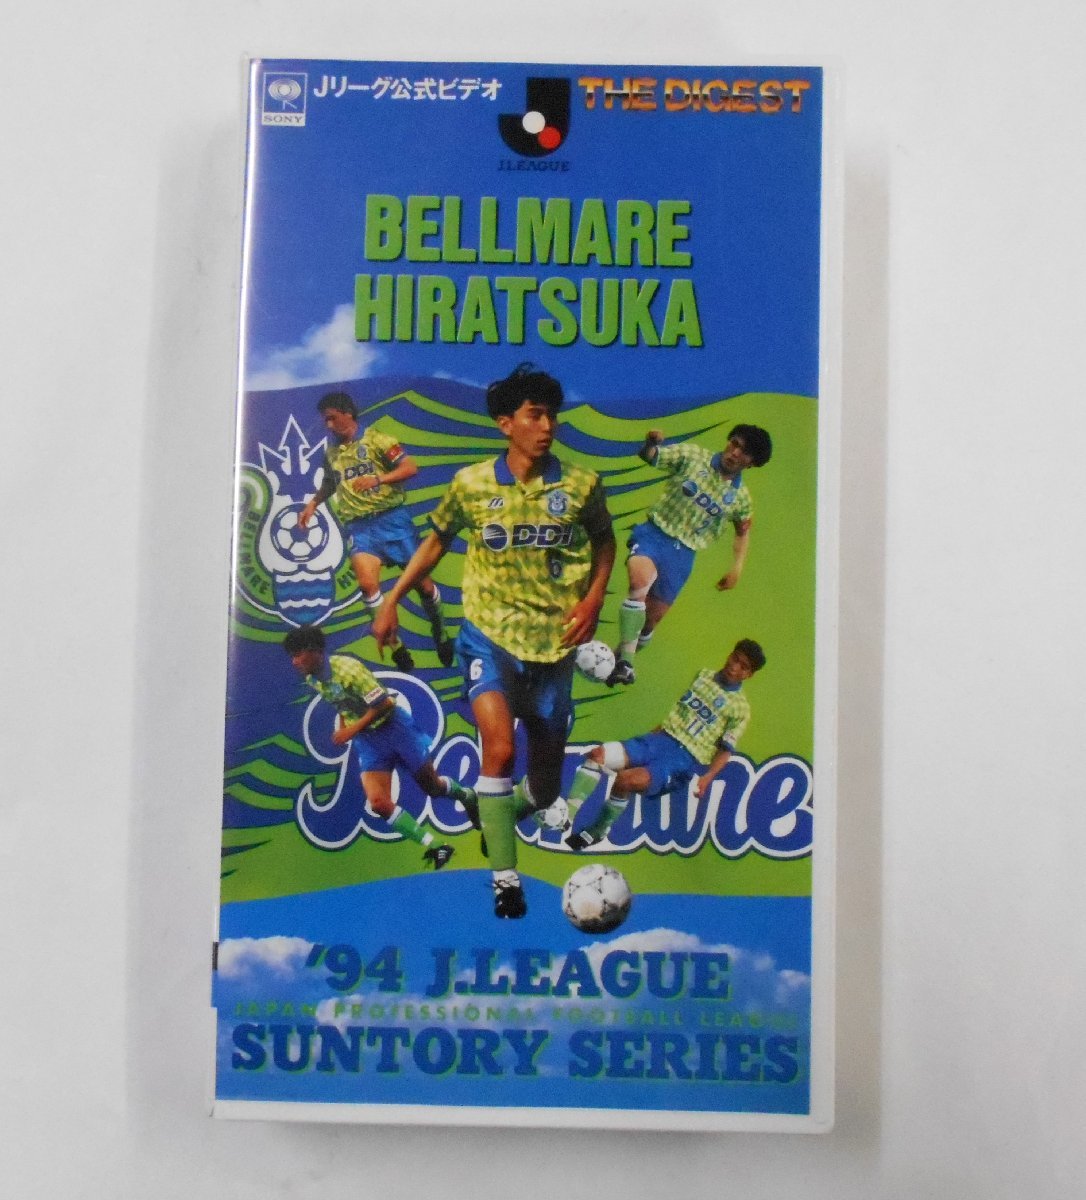  out of print J Lee g official Shonan bell mare flat .*94 Suntory series compilation VHS video 1994 year BELLMARE HIRATSUKA [u302]